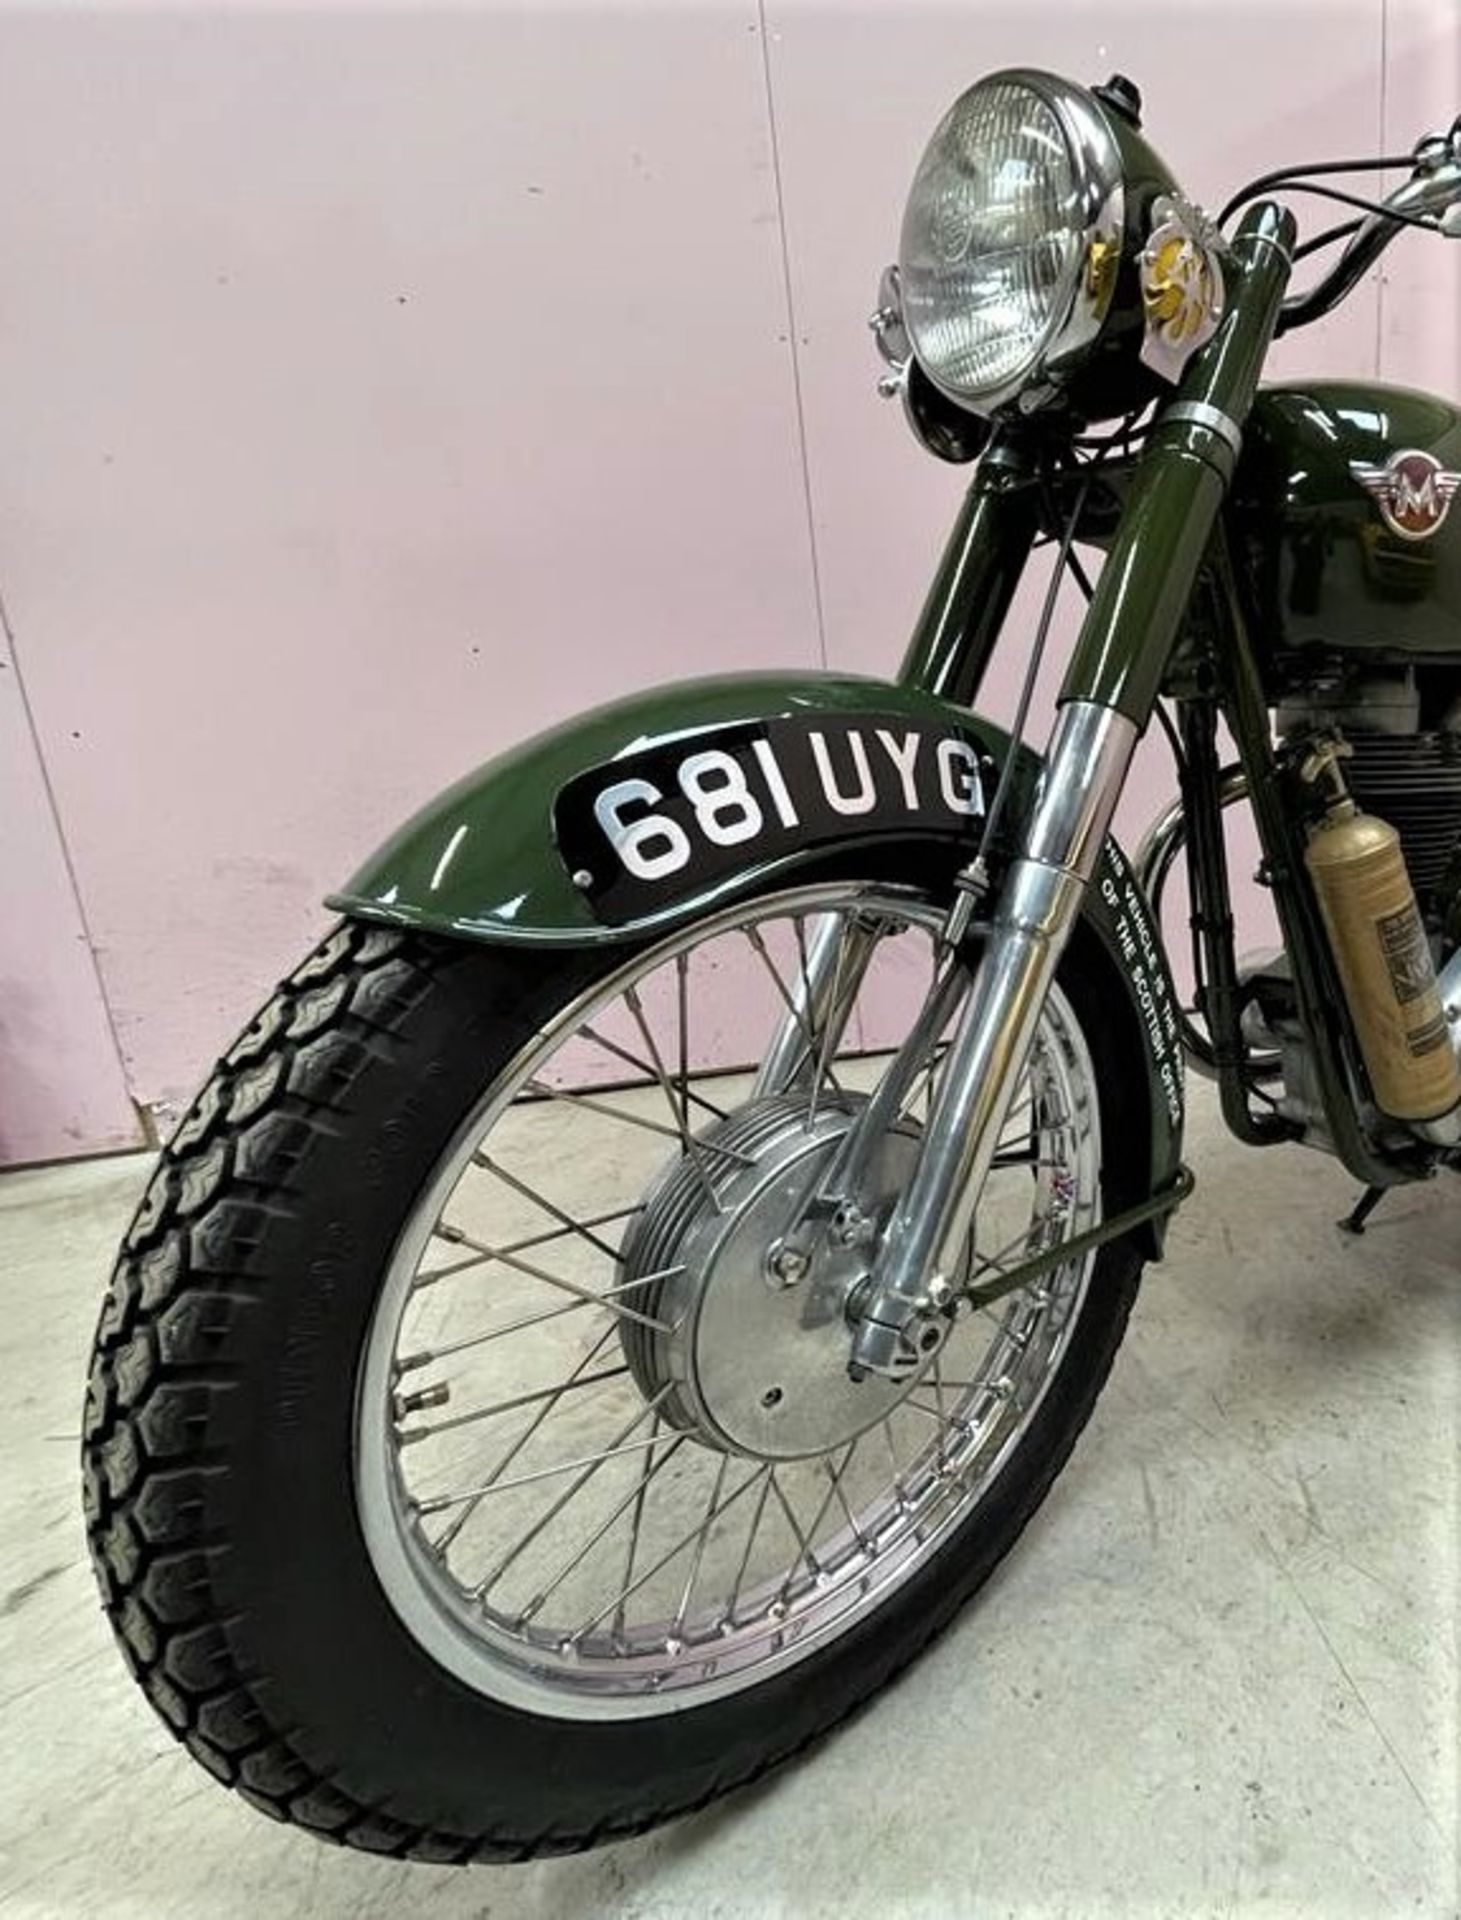 1960 MATCHLESS G3/L 350C AUXILIARY FIRE SERVICE MOTORCYCLE Registration Number: 681 UYG Frame - Image 7 of 7